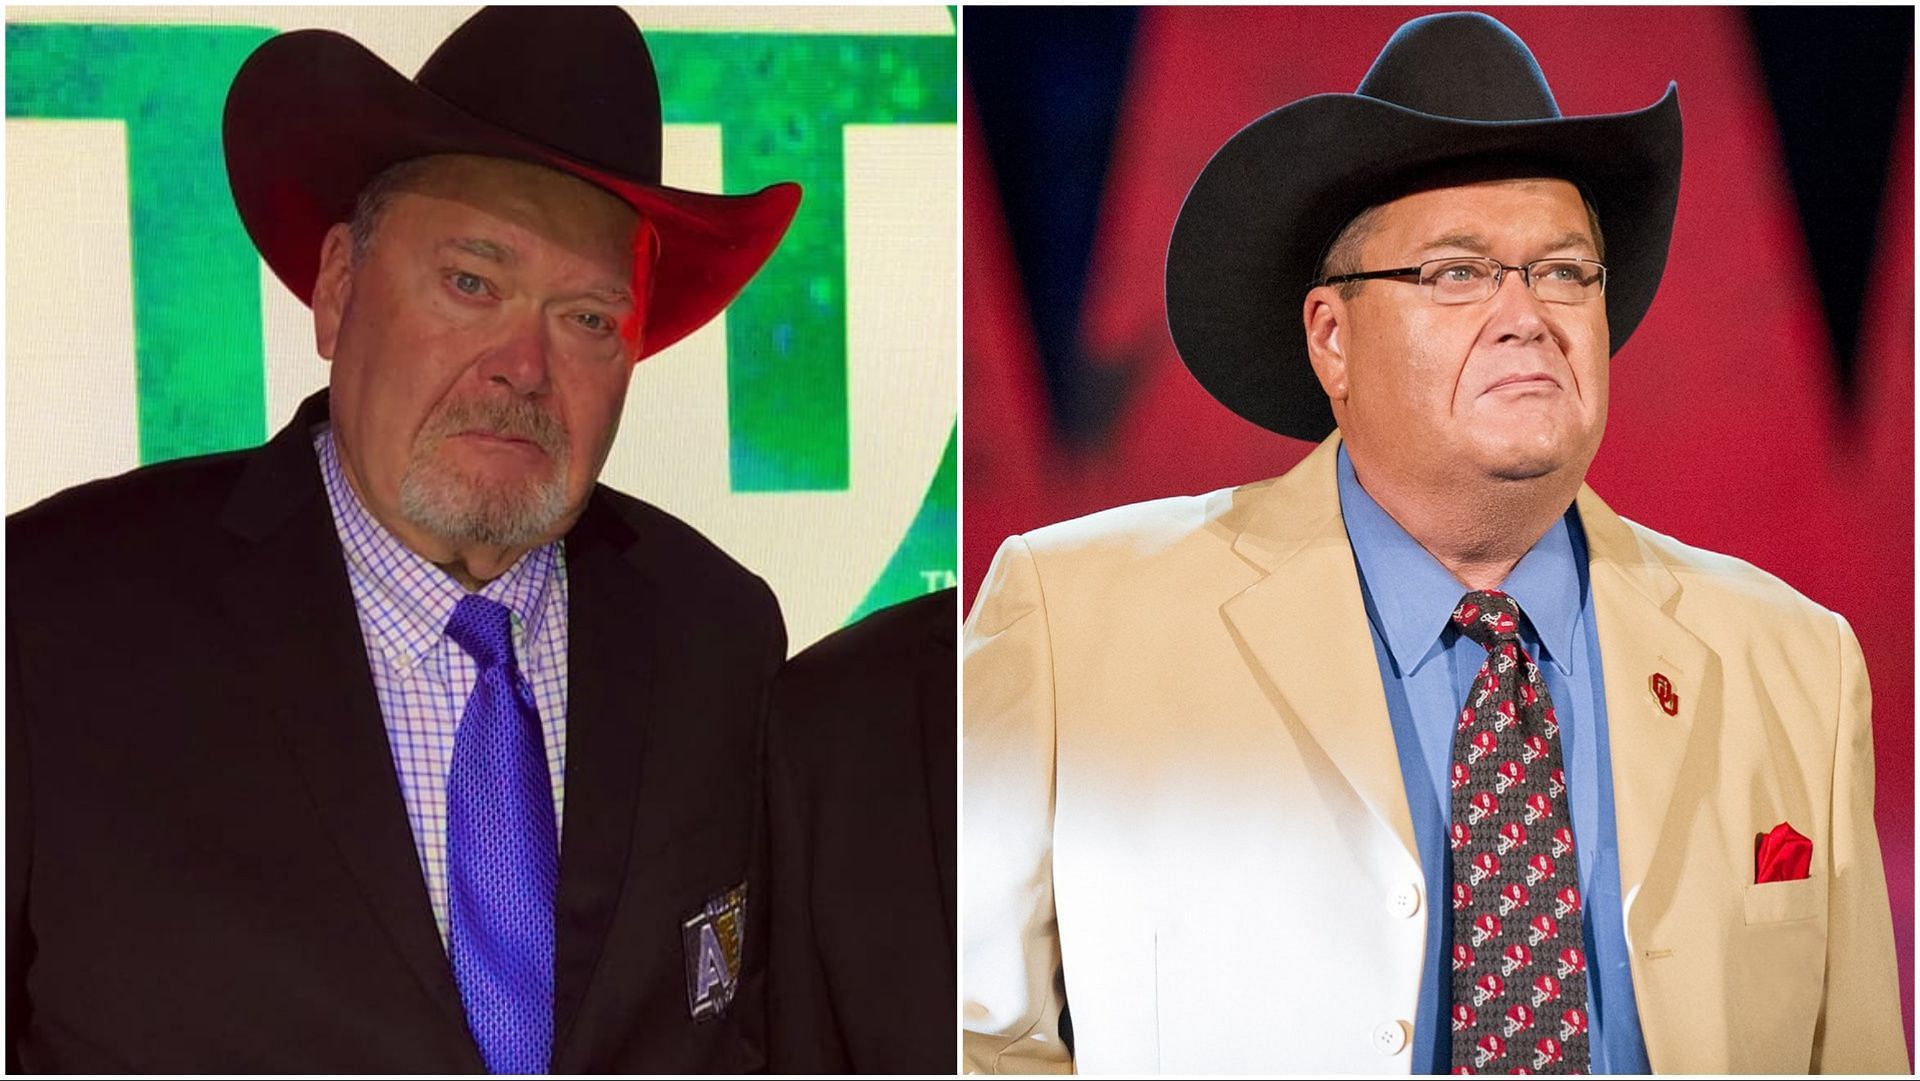 WWE Hall of Famer and current AEW star Jim Ross